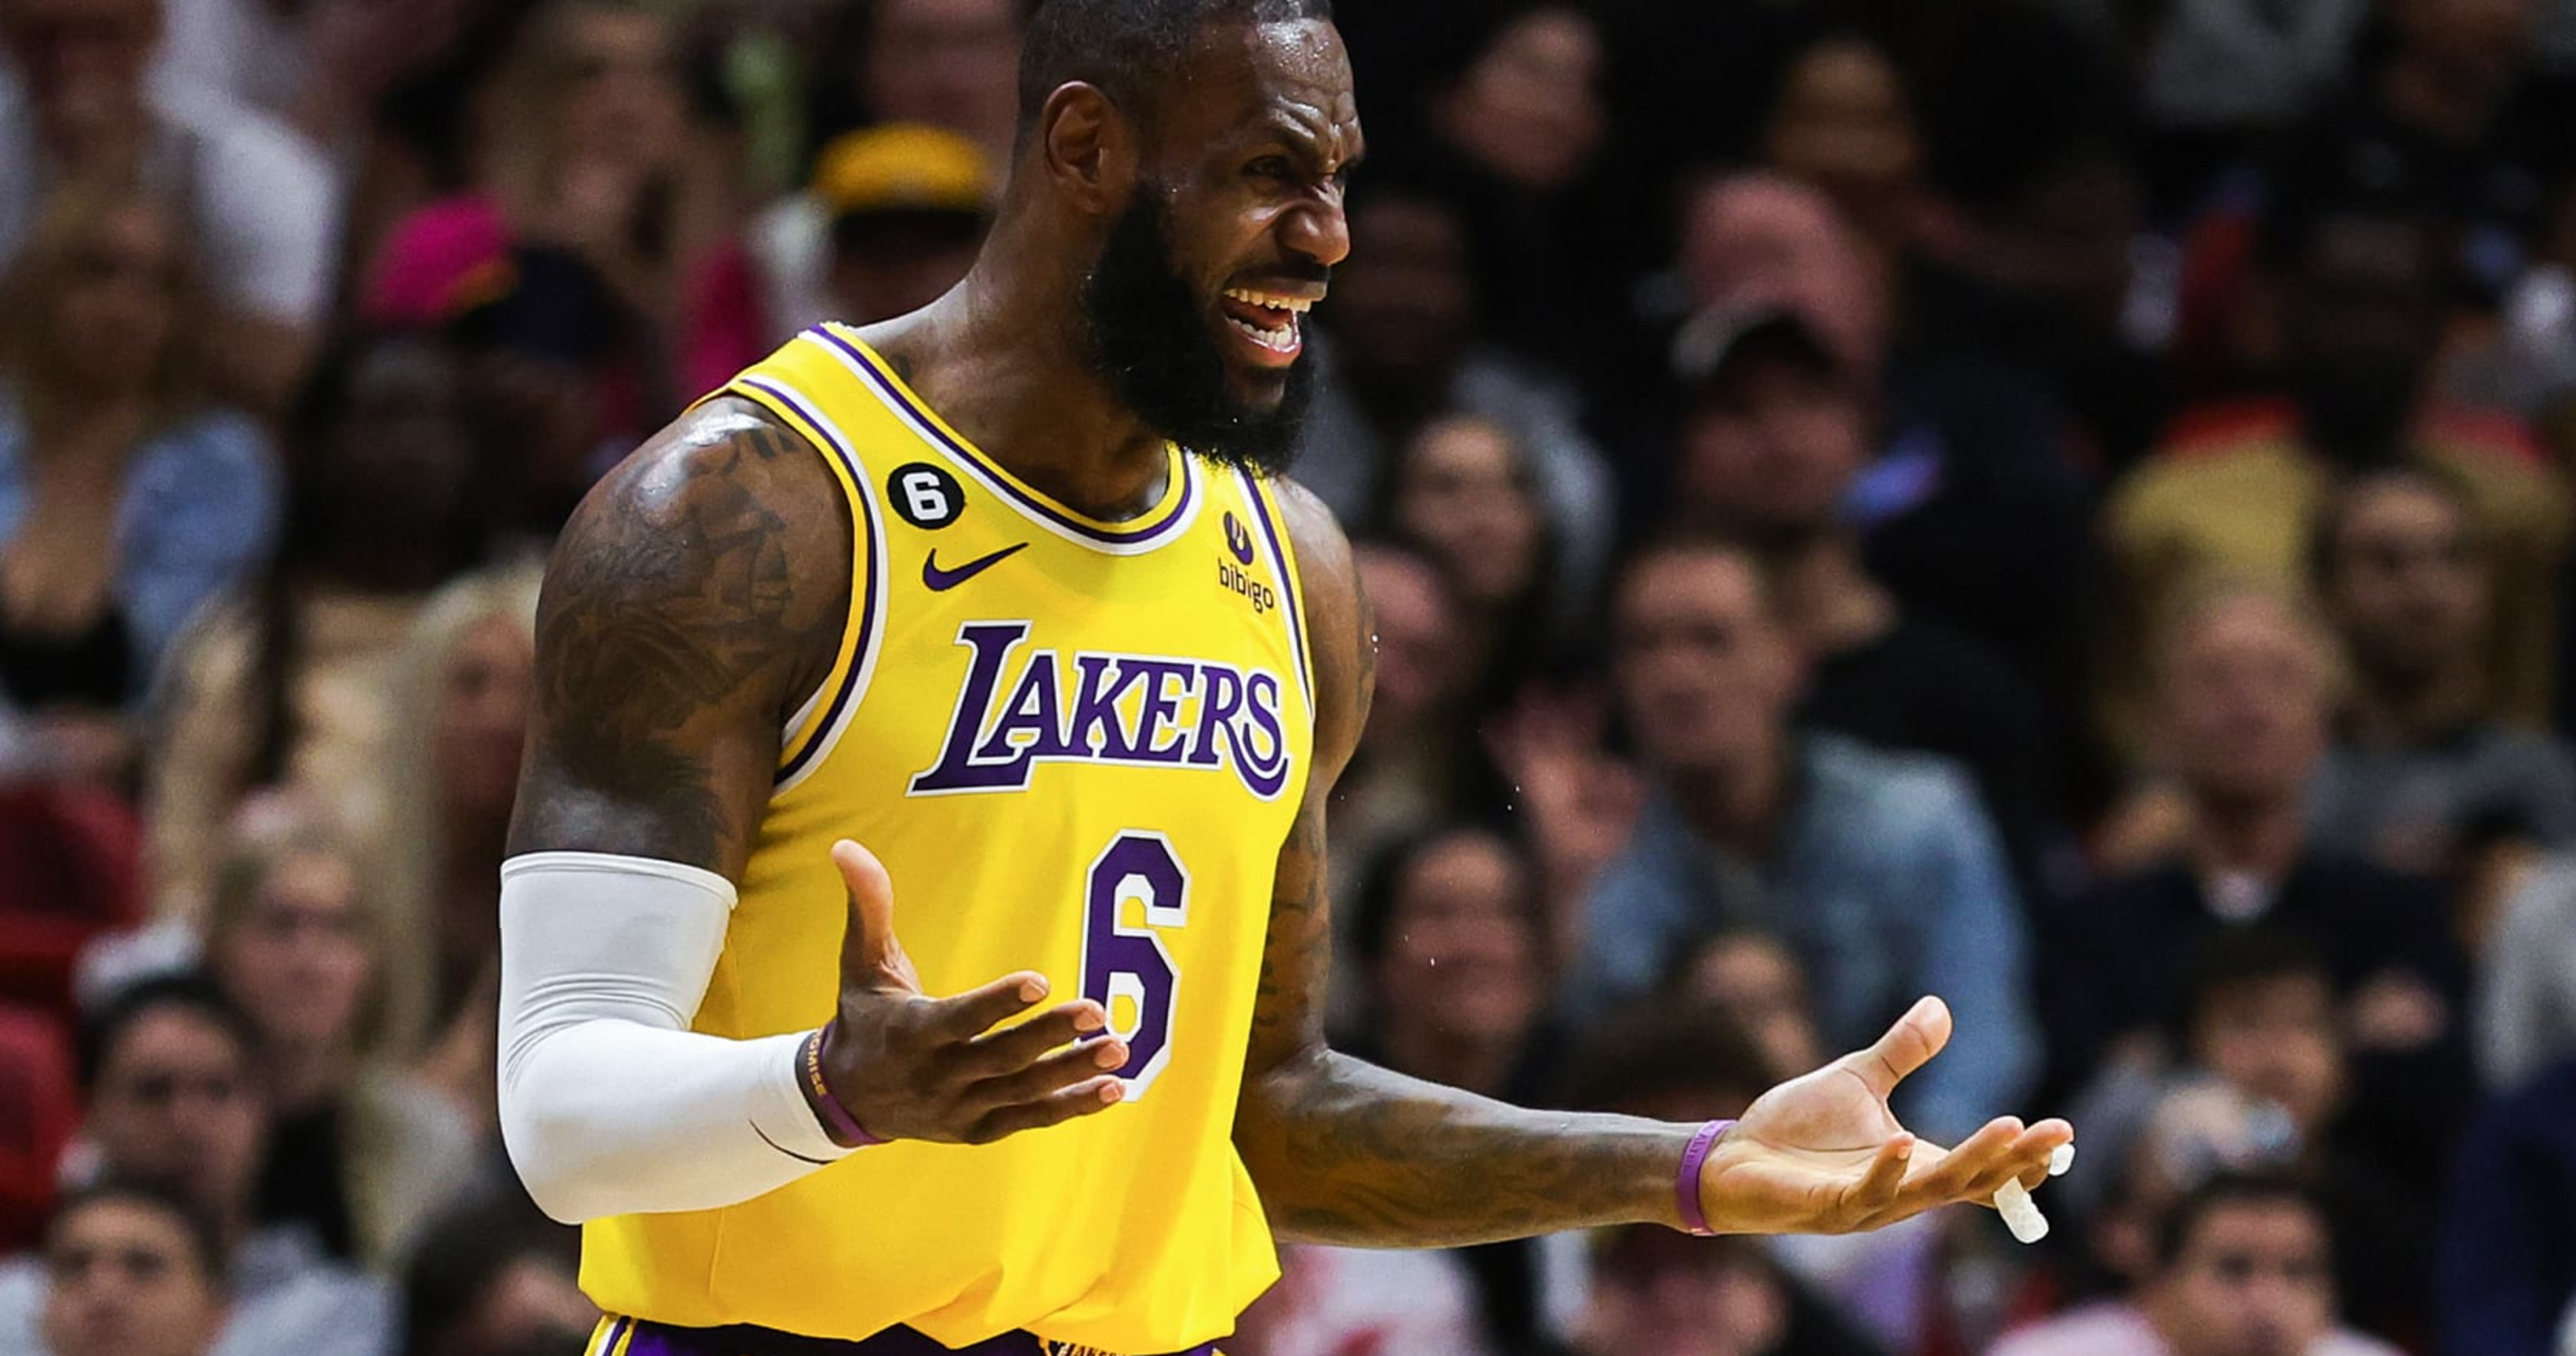 Lakers' LeBron James Says Future 'Up to My Mind;' Playing Without